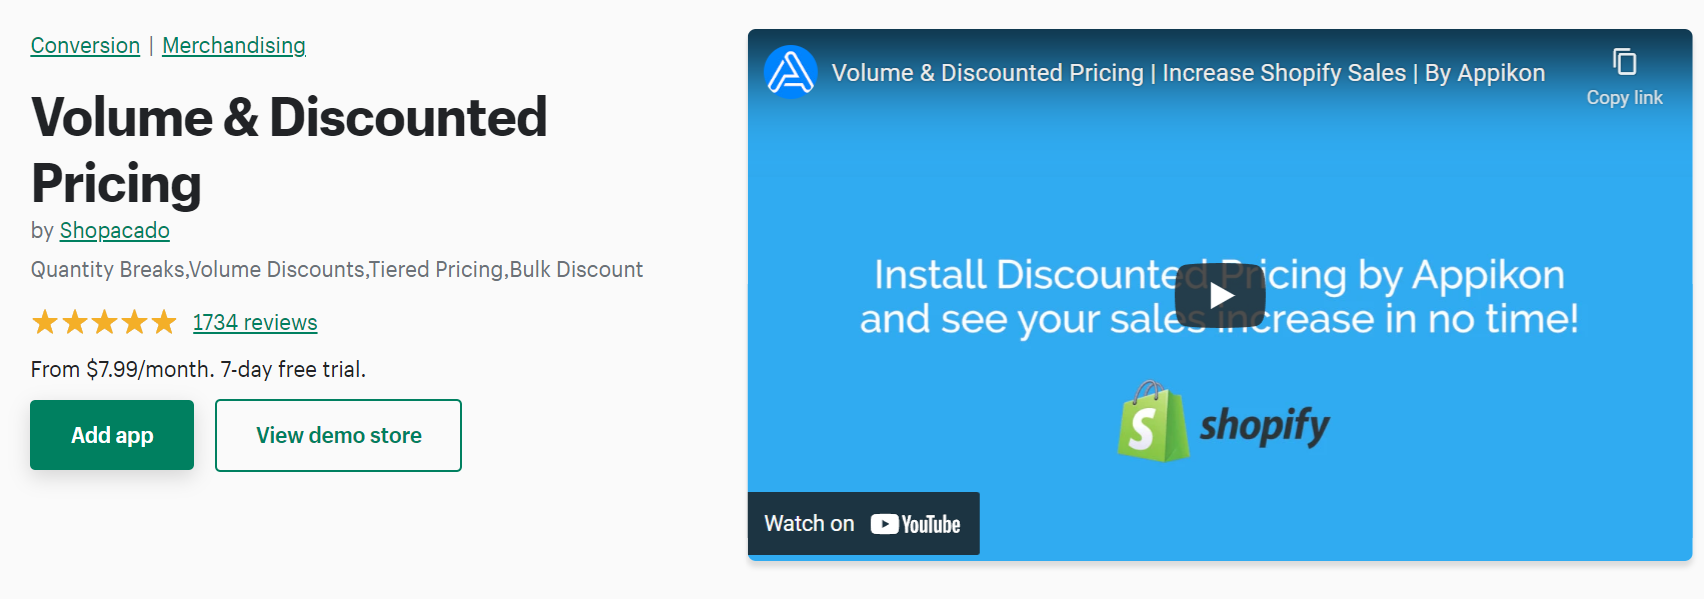 Volume & Discounted Pricing App